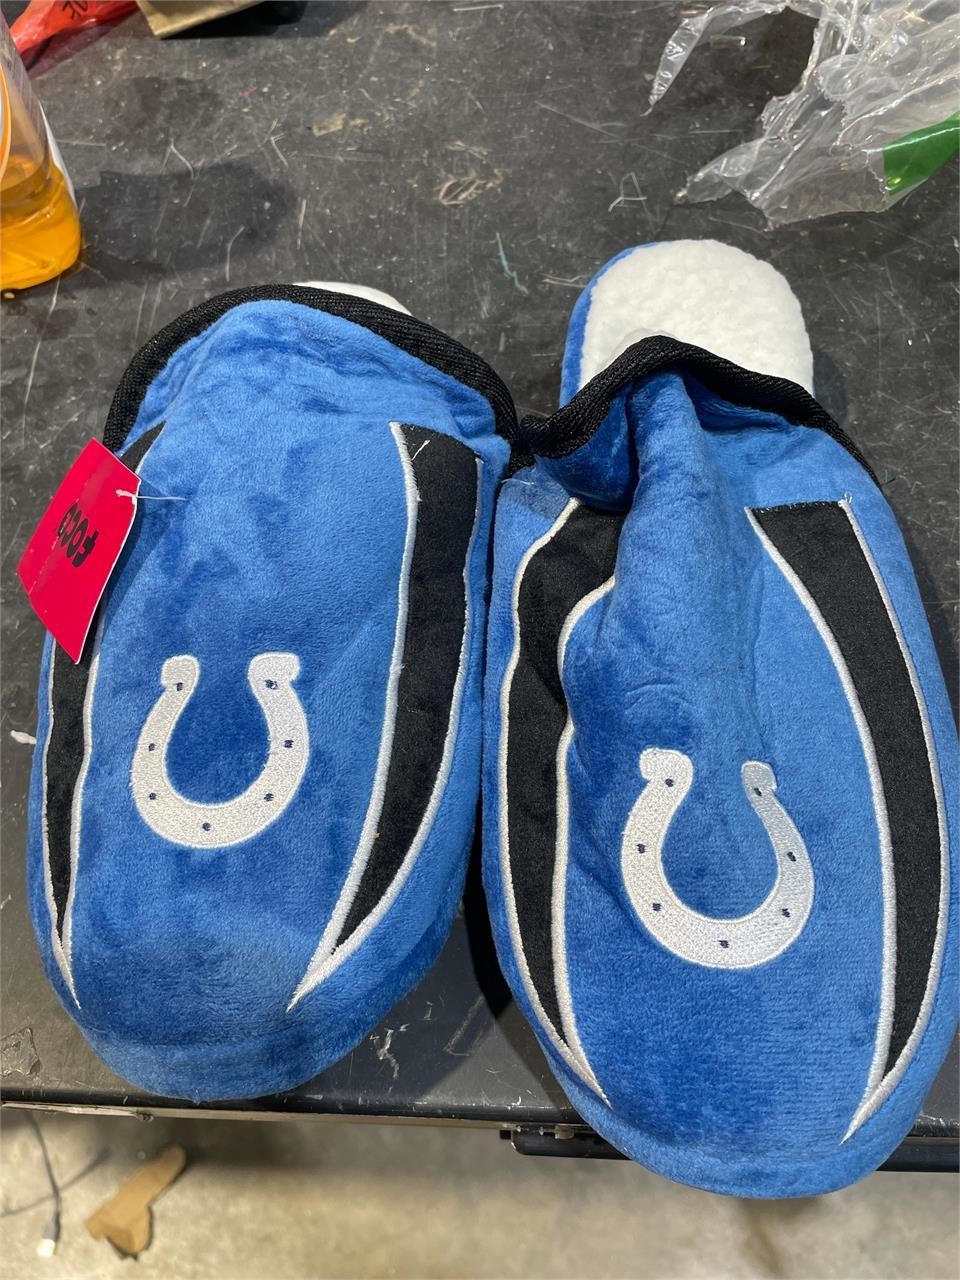 Indianapolis Colts slippers size 9-10 M